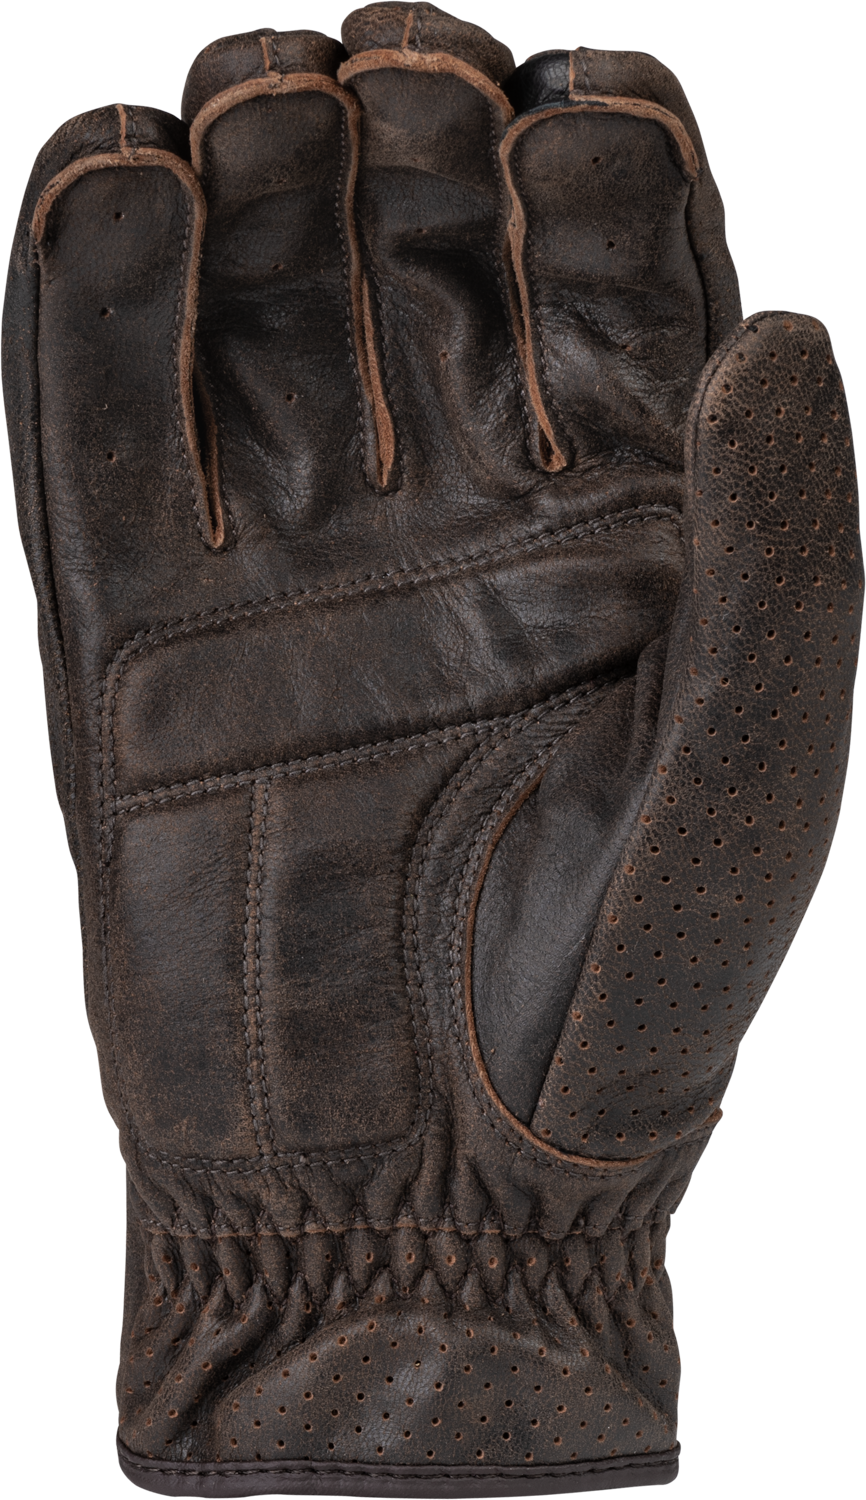 Jab Perforated Gloves Brown 3x